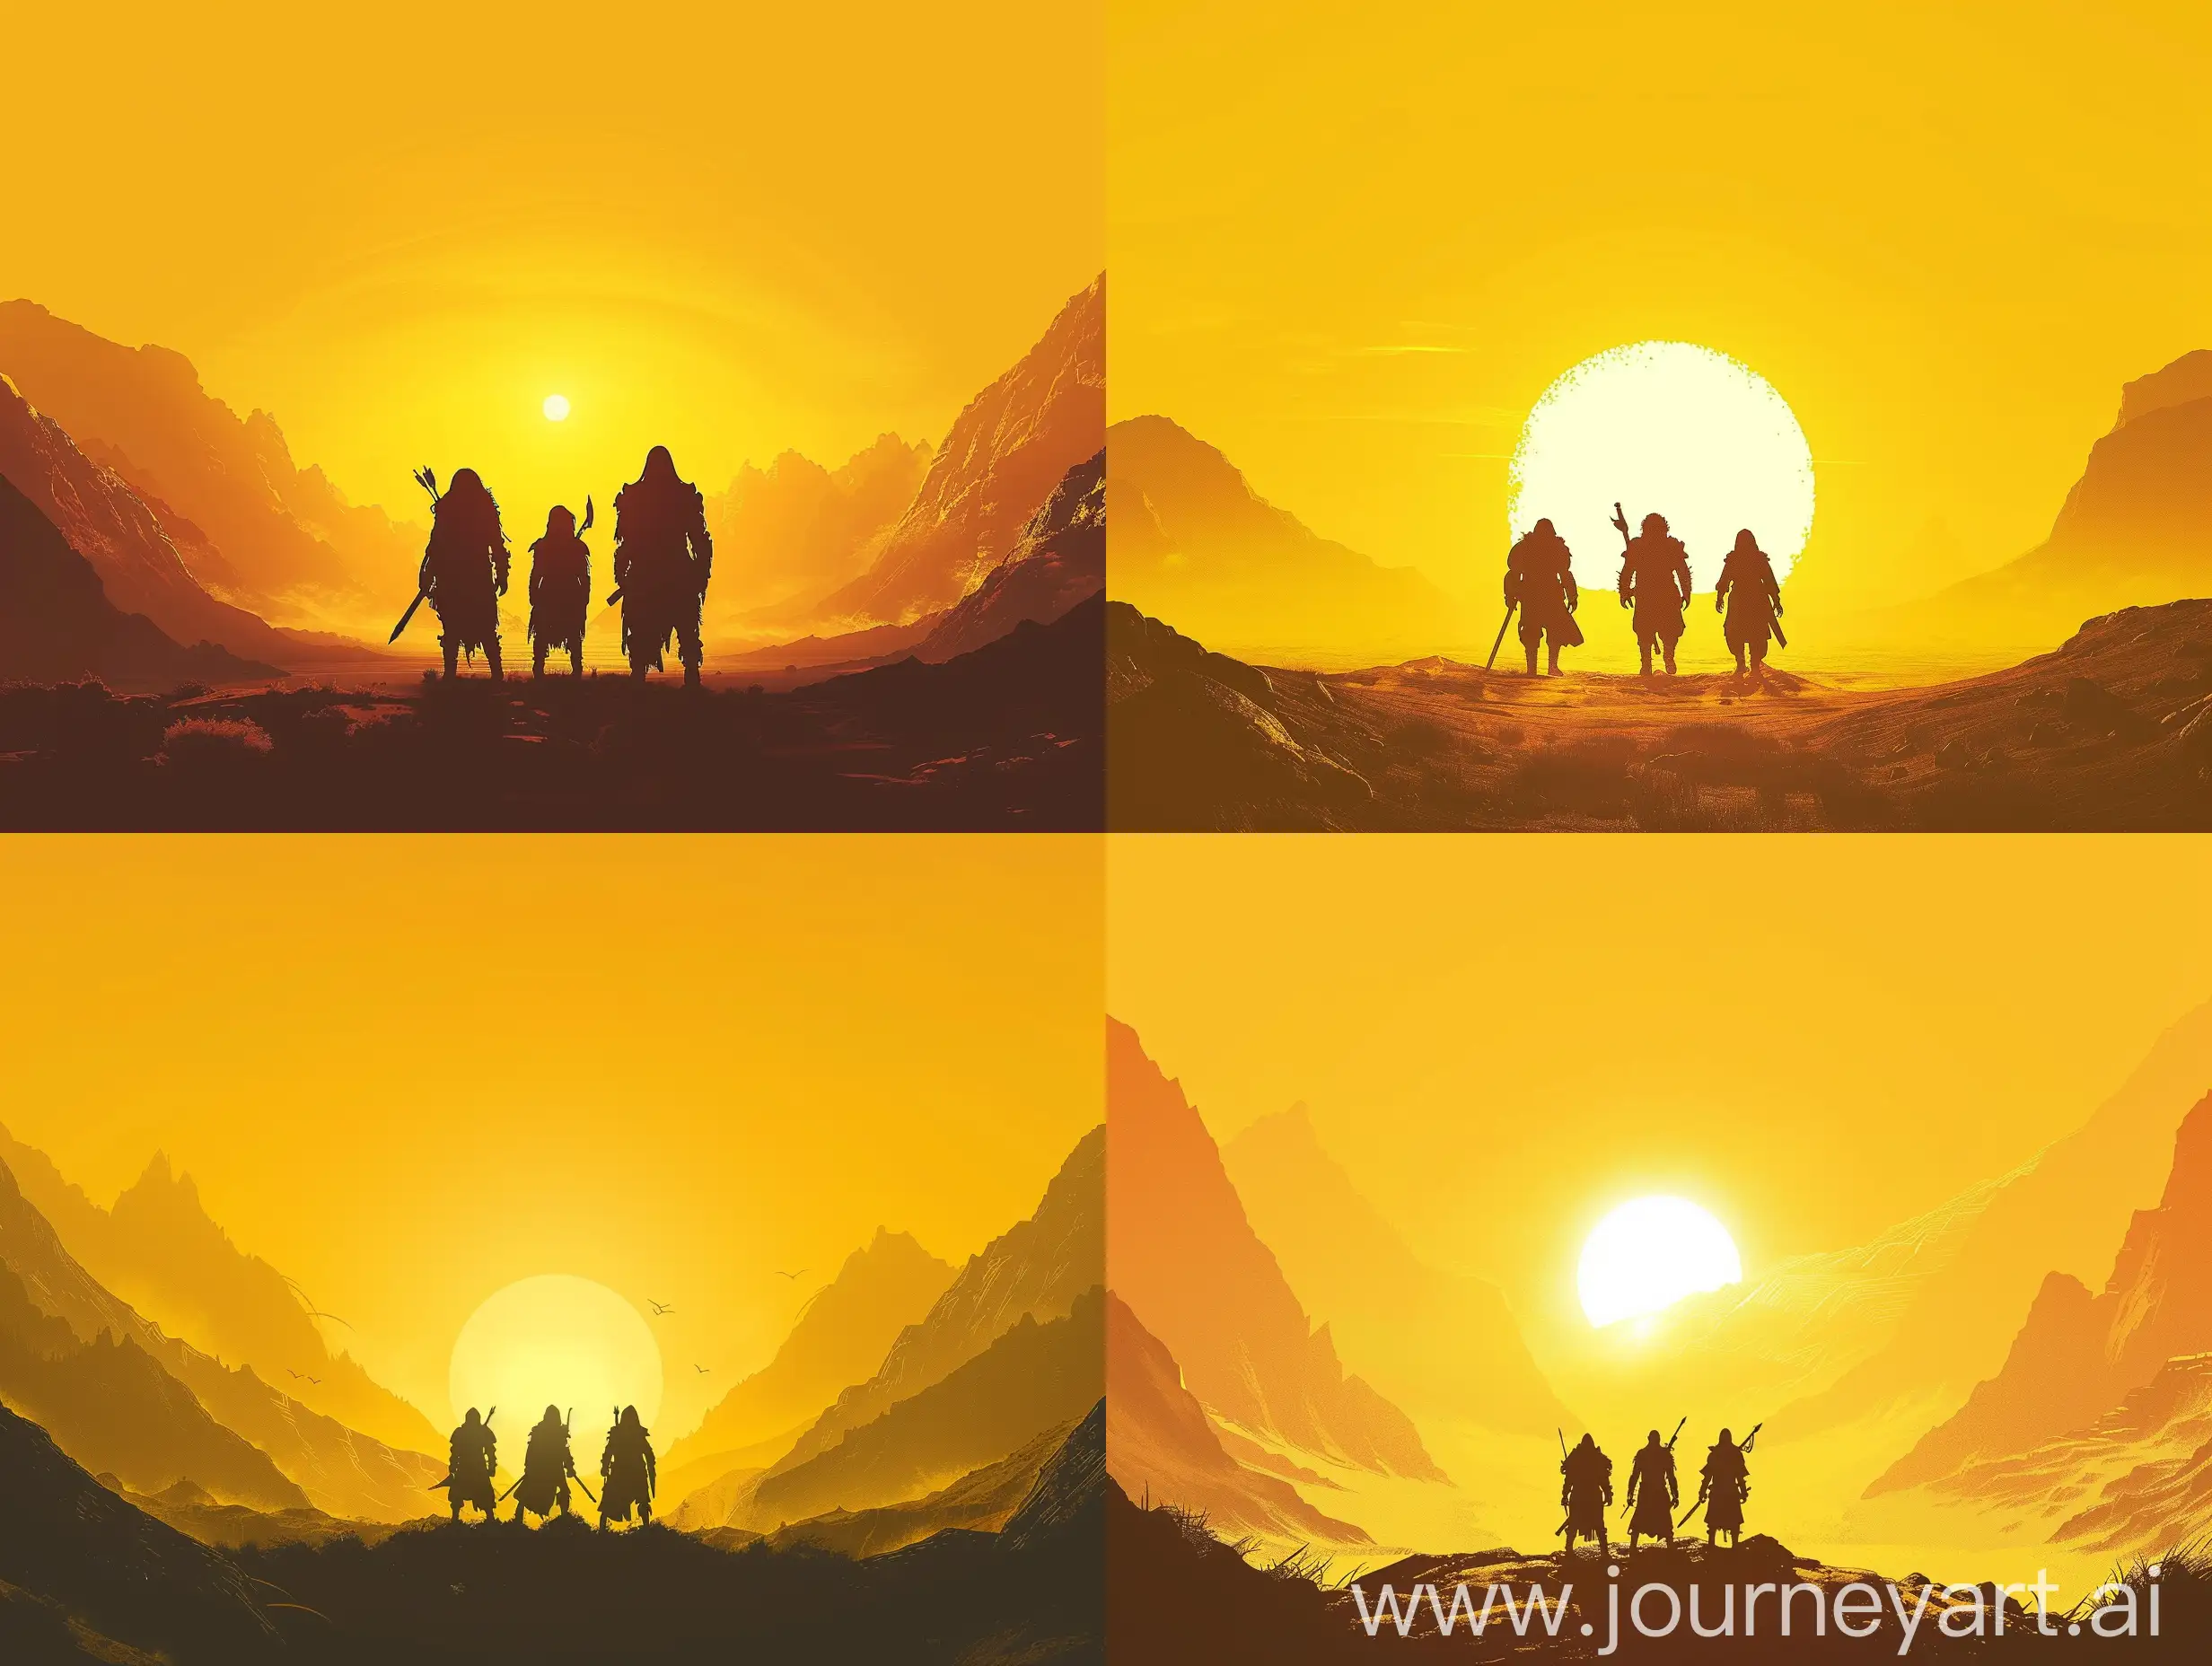 yellow-orange background, clear sunset, mountains left and right, silhouettes of fantasy travelers in the center, front view